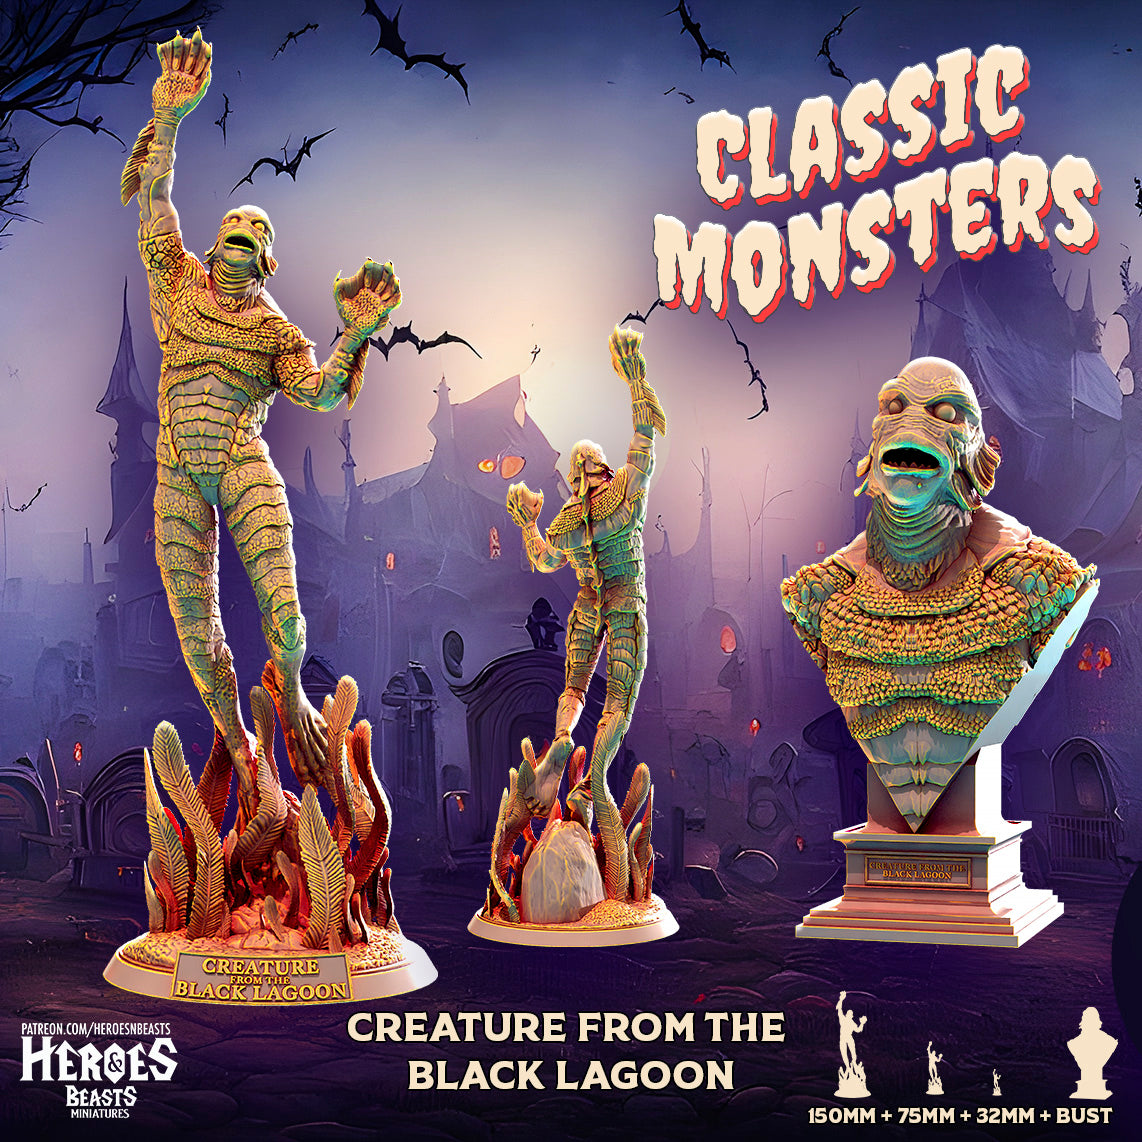 Creature from the Black Lagoon by HeroesNBeasts | Please Read Description